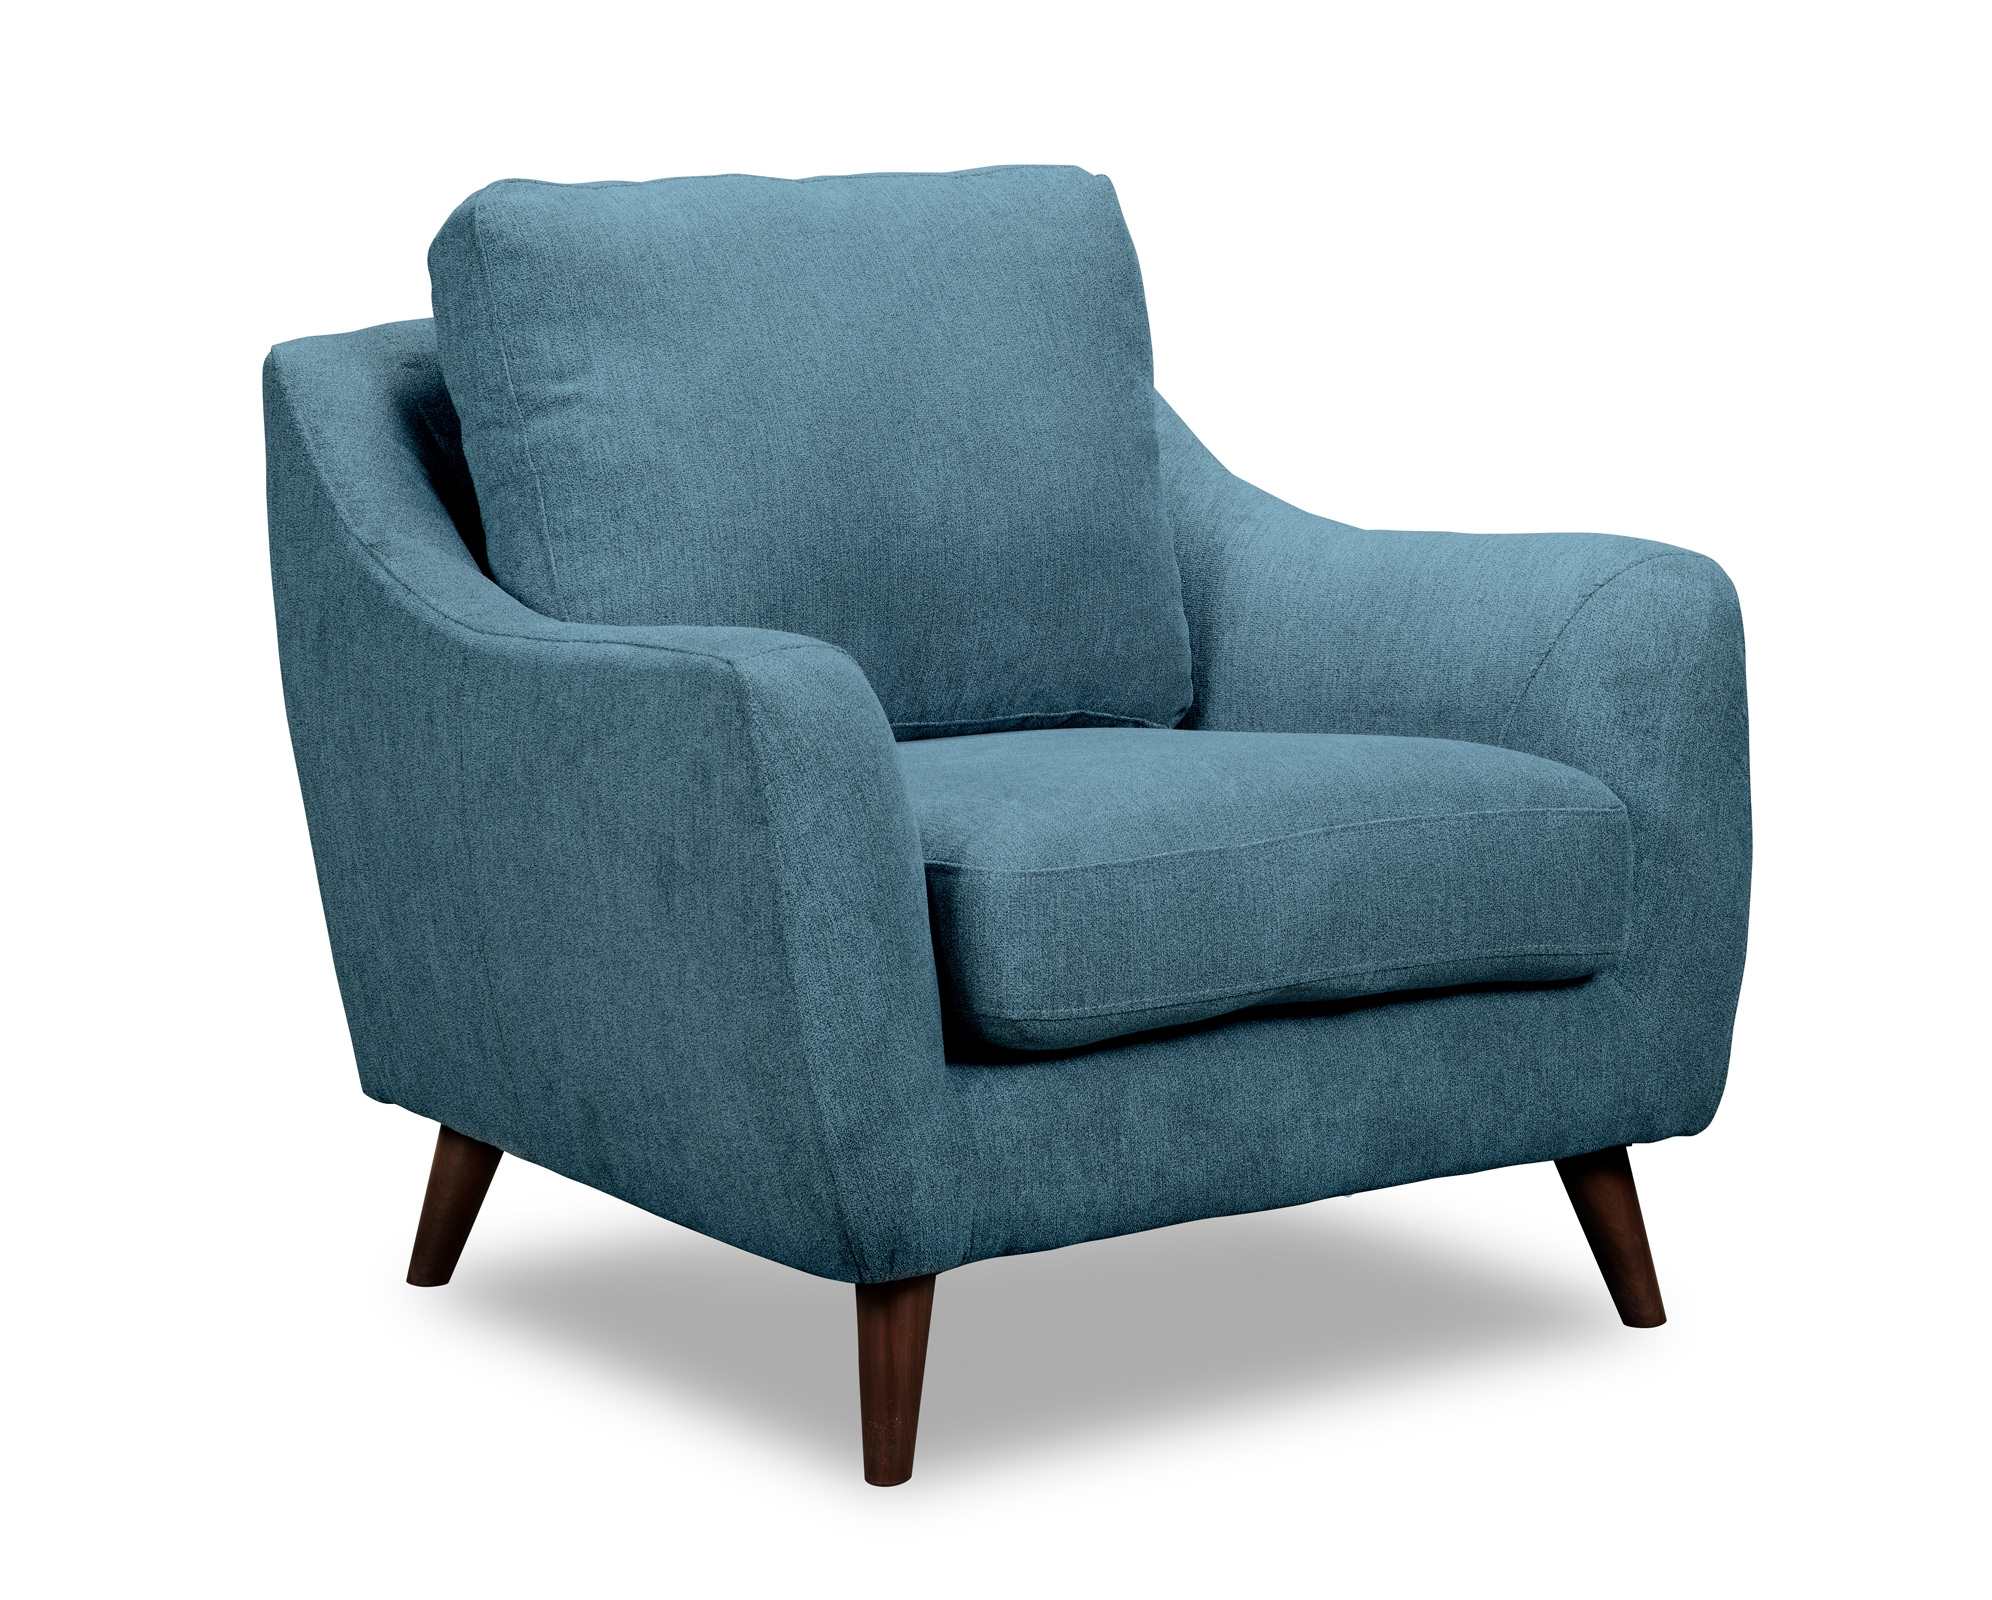 Kitchener seating collection Light Blue 9040